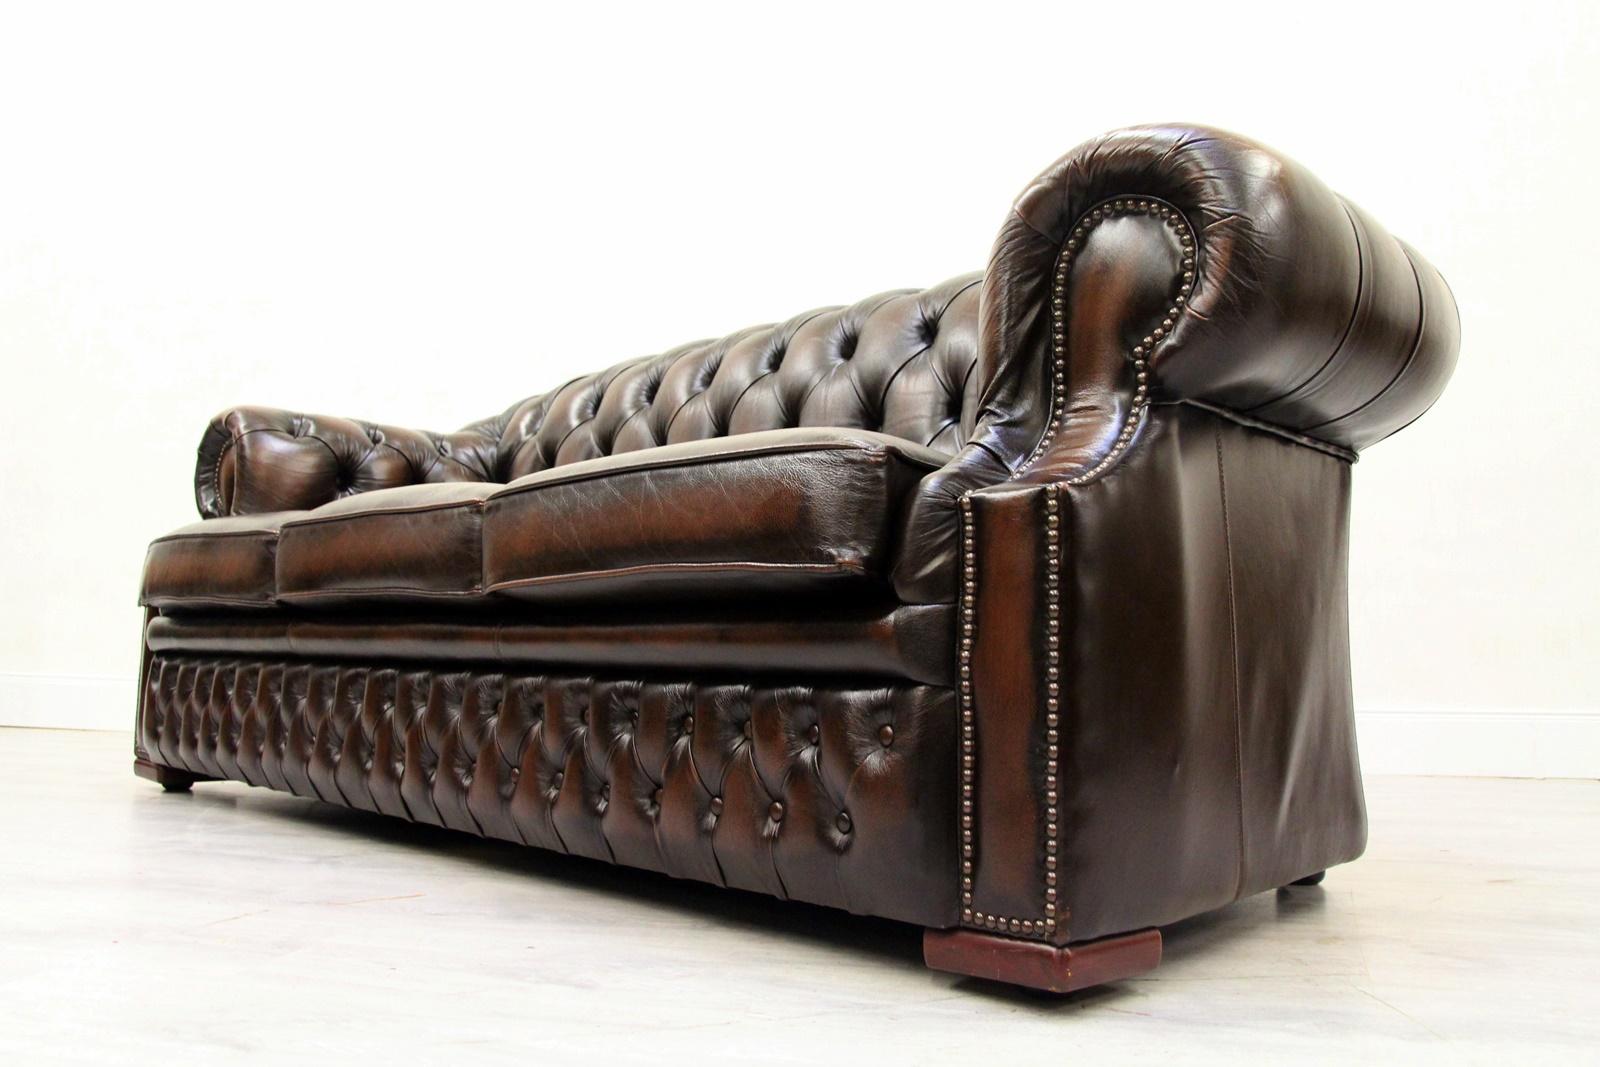 Chesterfield Centurion Sofa Leather Antique Vintage Couch, English For Sale 2